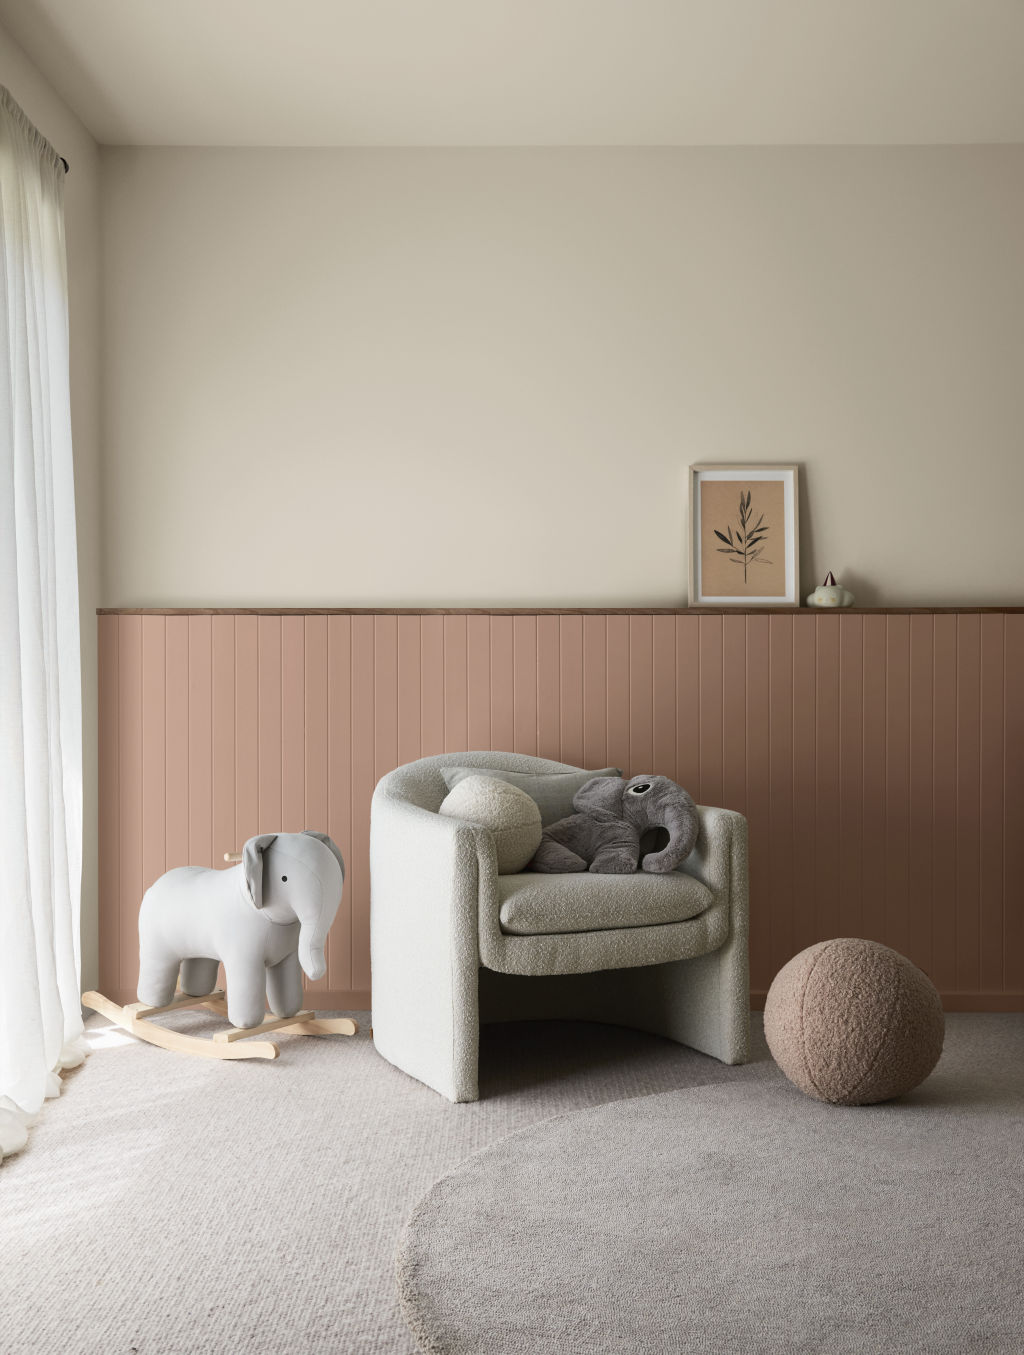 Feature walls are no longer a relic of the '90s. Stylist: Bree Leech. Photo: Lisa Cohen for Dulux Australia